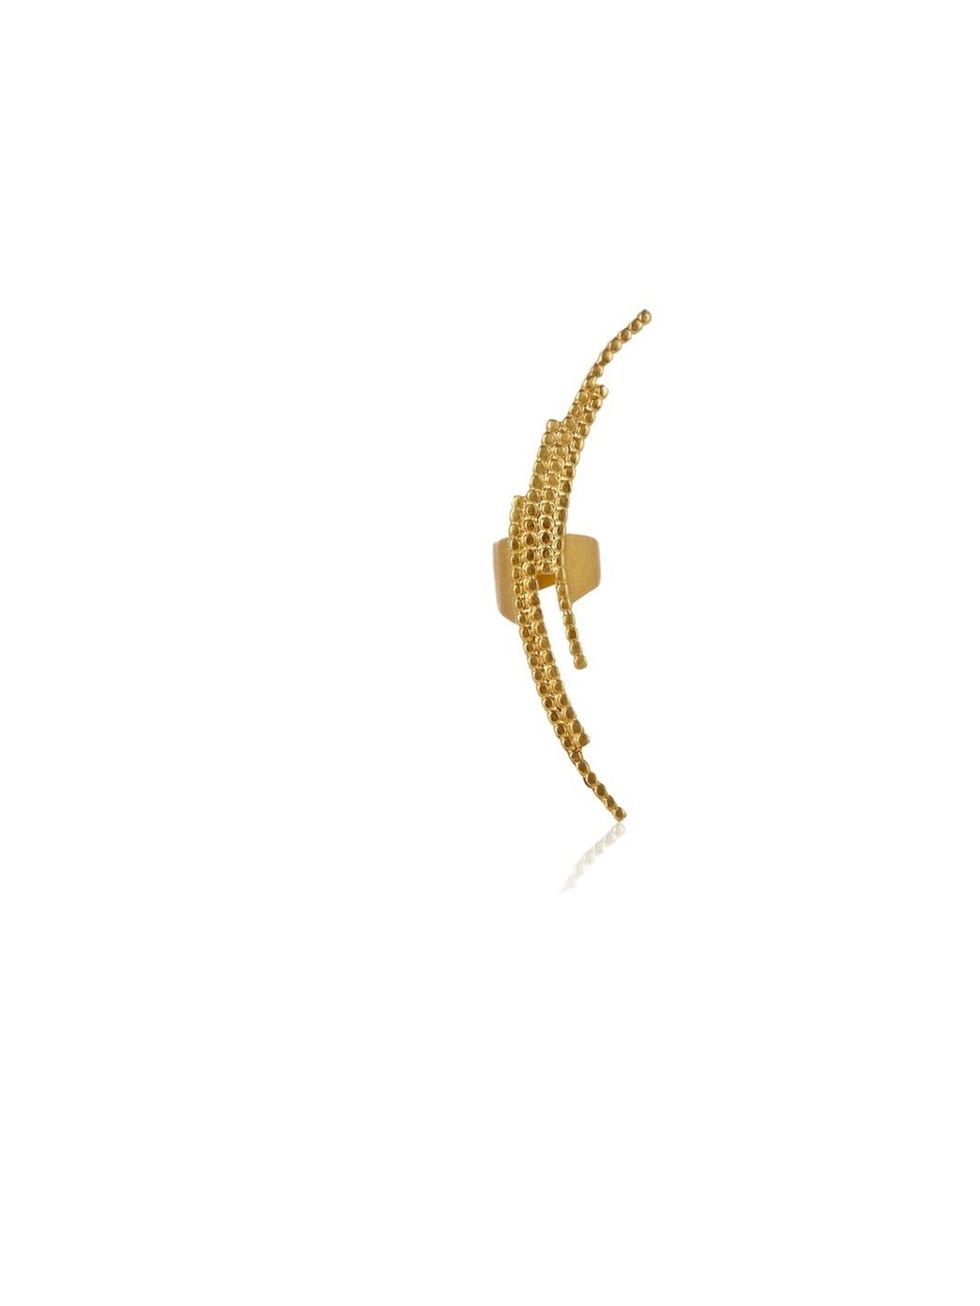 <p>Maria Black's crescent ear cuff is subtle enough for the office and cool enough for out, £90, at <a href="http://www.avenue32.com/jewellery/all-jewellery/all-jewellery/gold-plated-crescent-earcuff-74802.html">Avenue32.com</a></p>